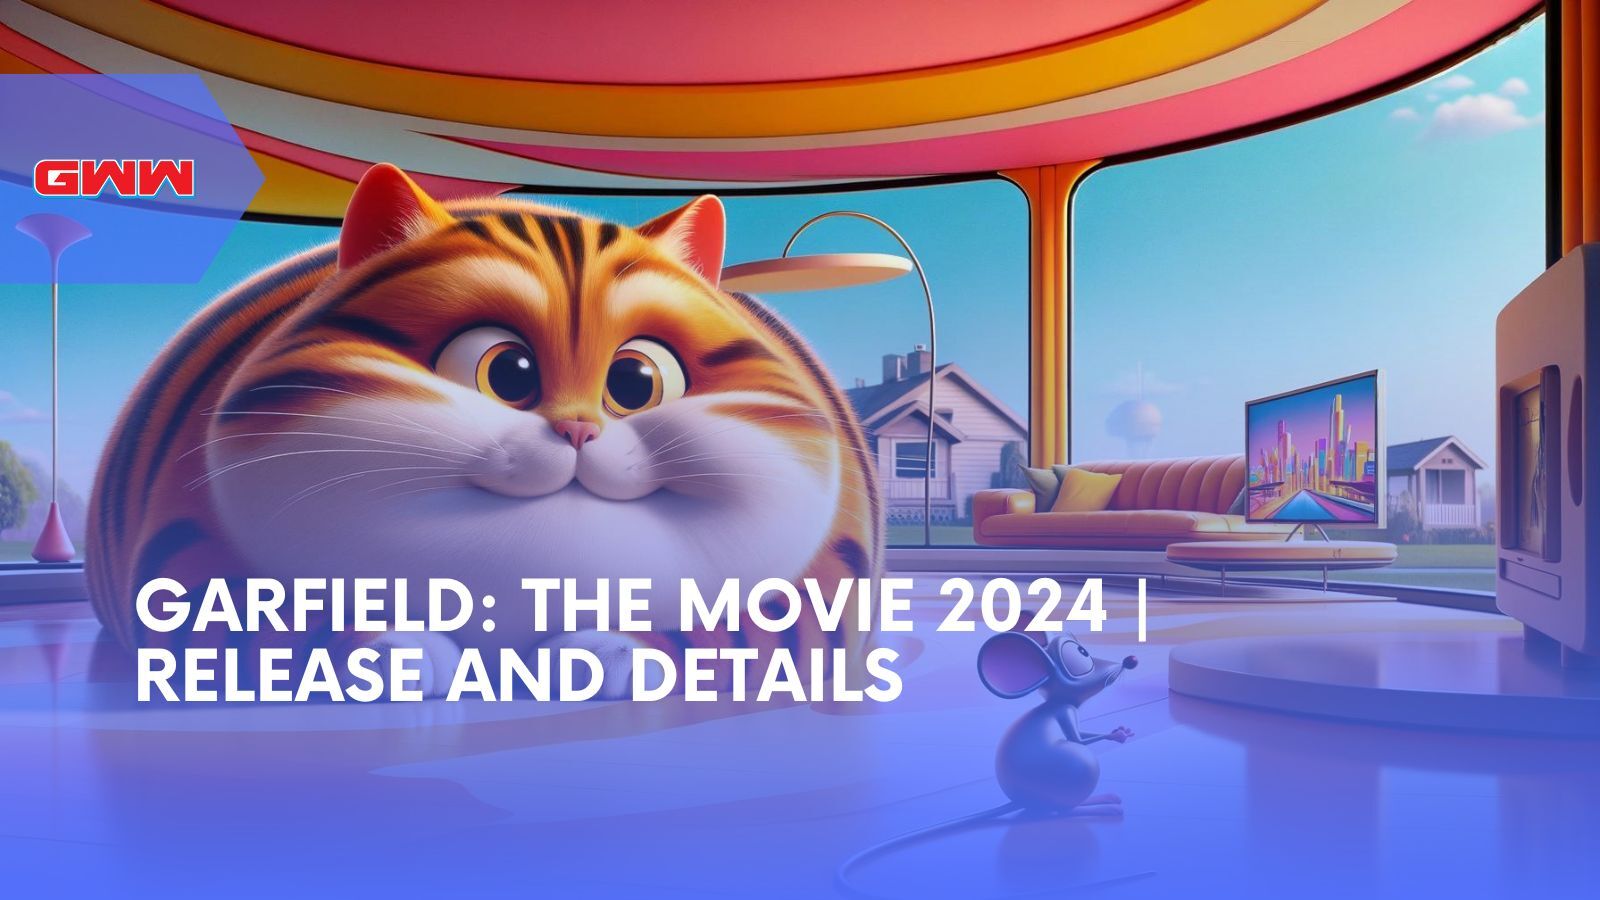 Garfield: The Movie 2024 | Release and Details